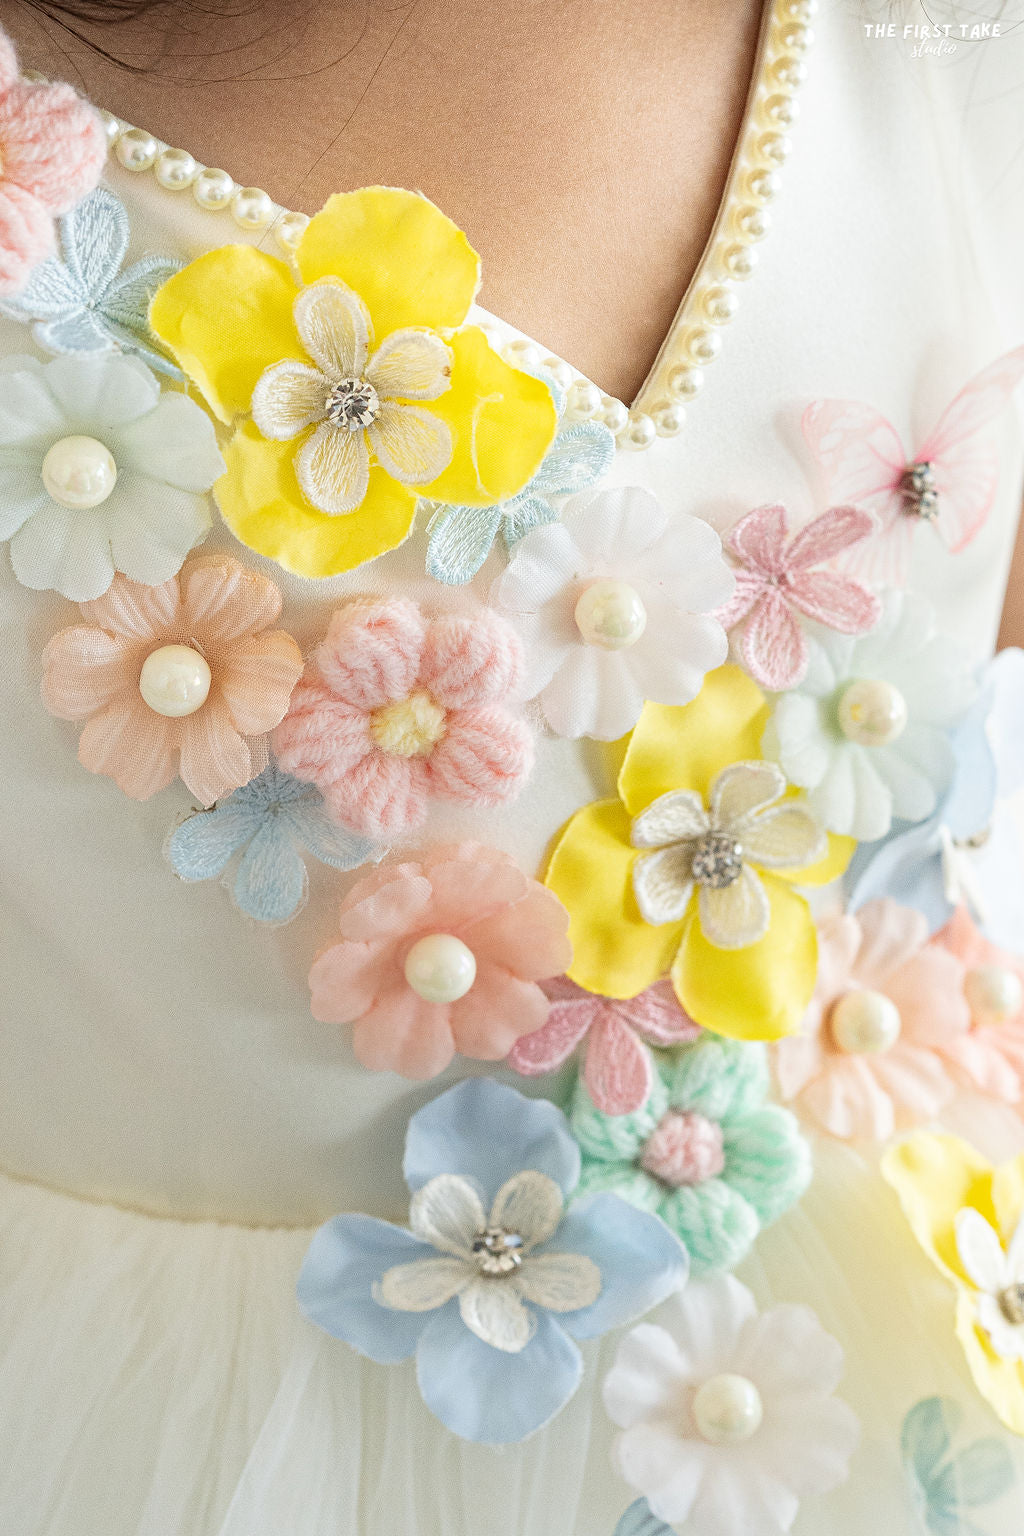 Blooming blossom dress